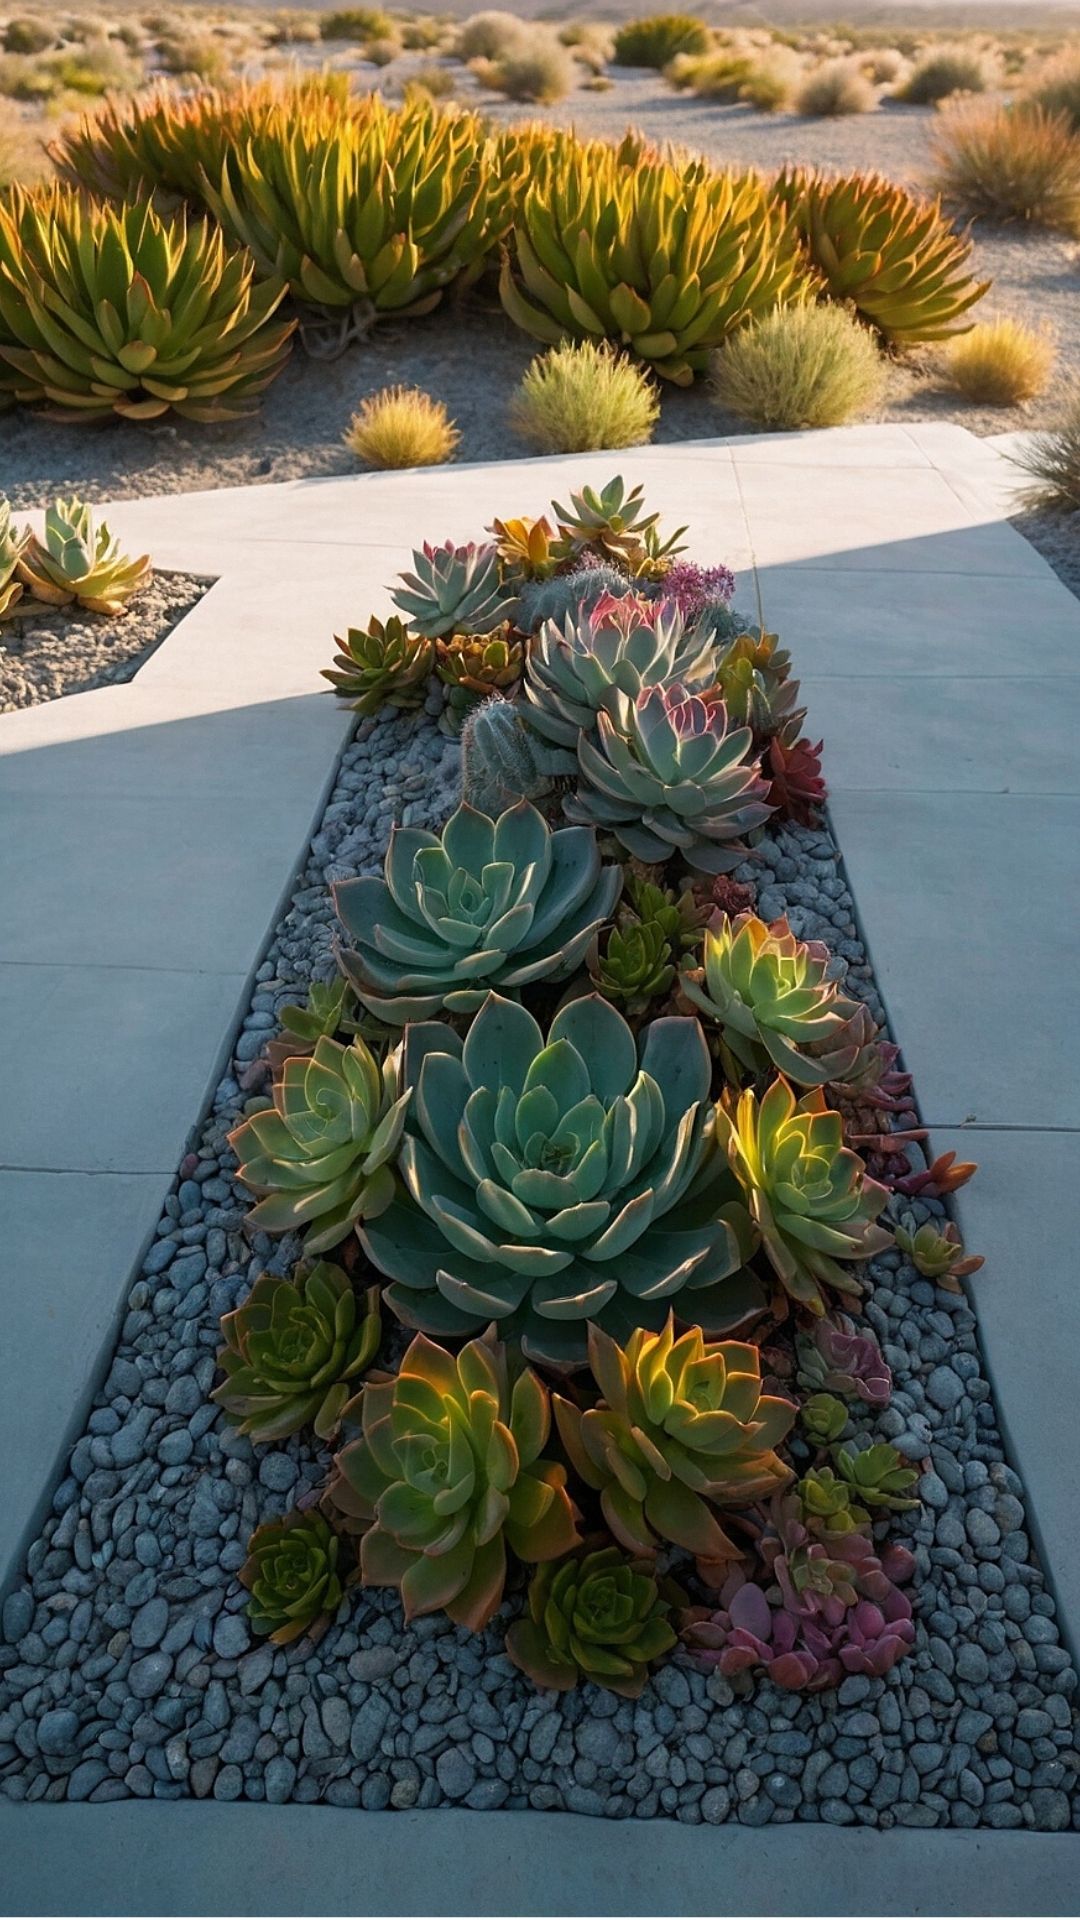 Sunset Succulents: The Warmth of Desert Dusk